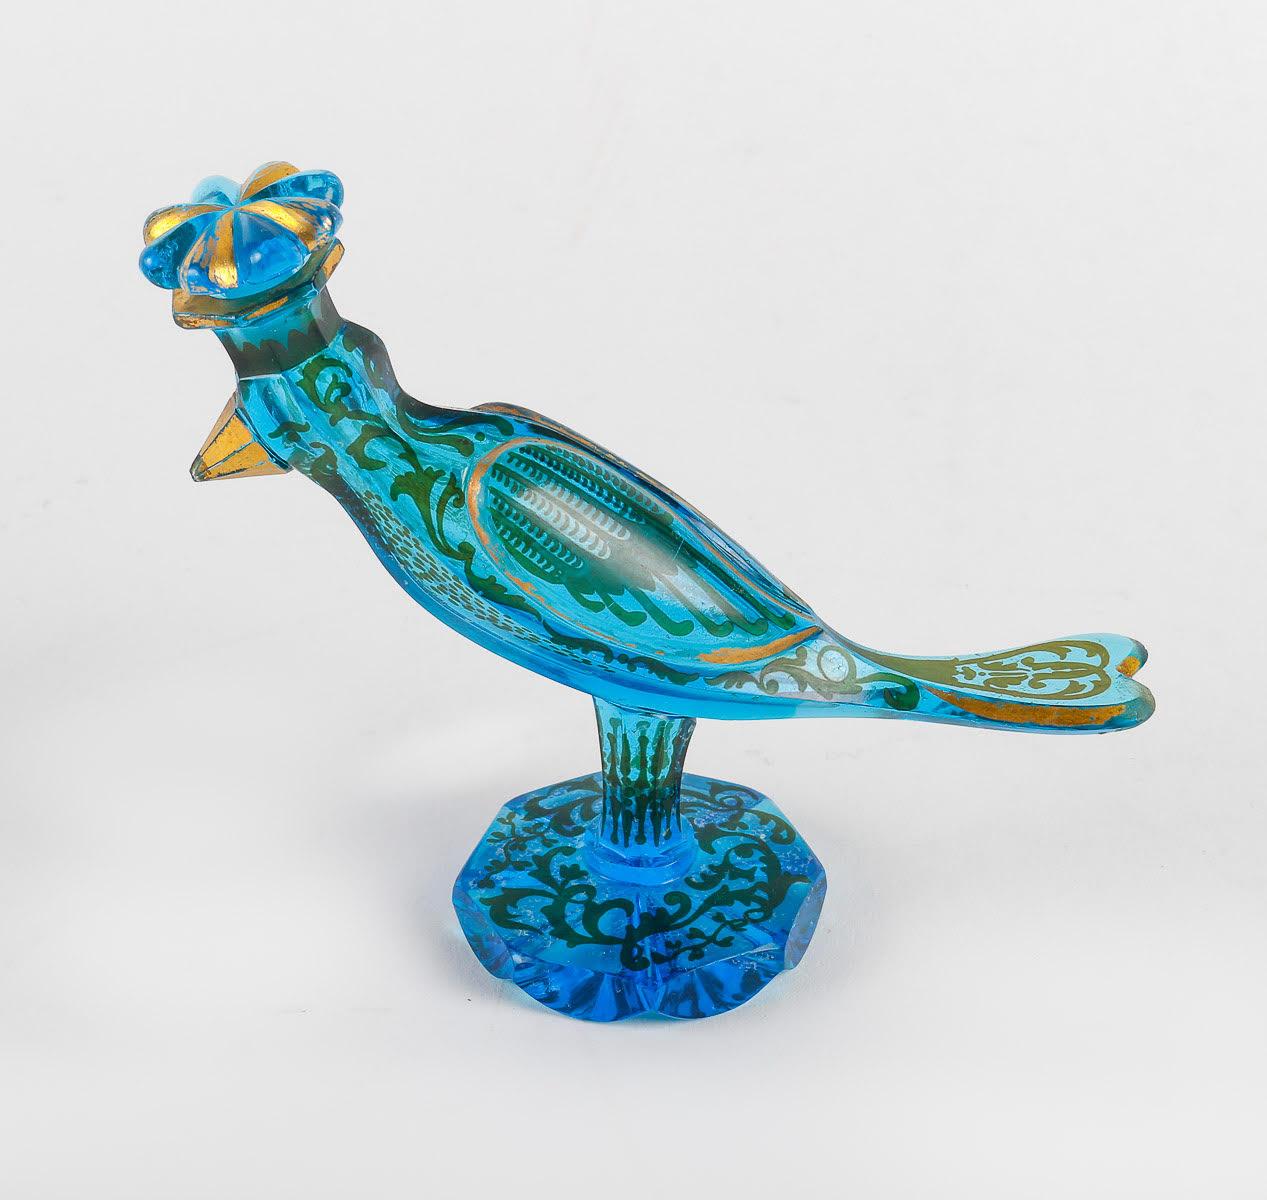 Bohemian Crystal Enamelled Bird Bottle, 19th Century.

Bohemian crystal bird bottle enamelled with silver and gold, 19th century, Napoleon III period.    
h: 12.5cm, w: 15cm, d: 5cm